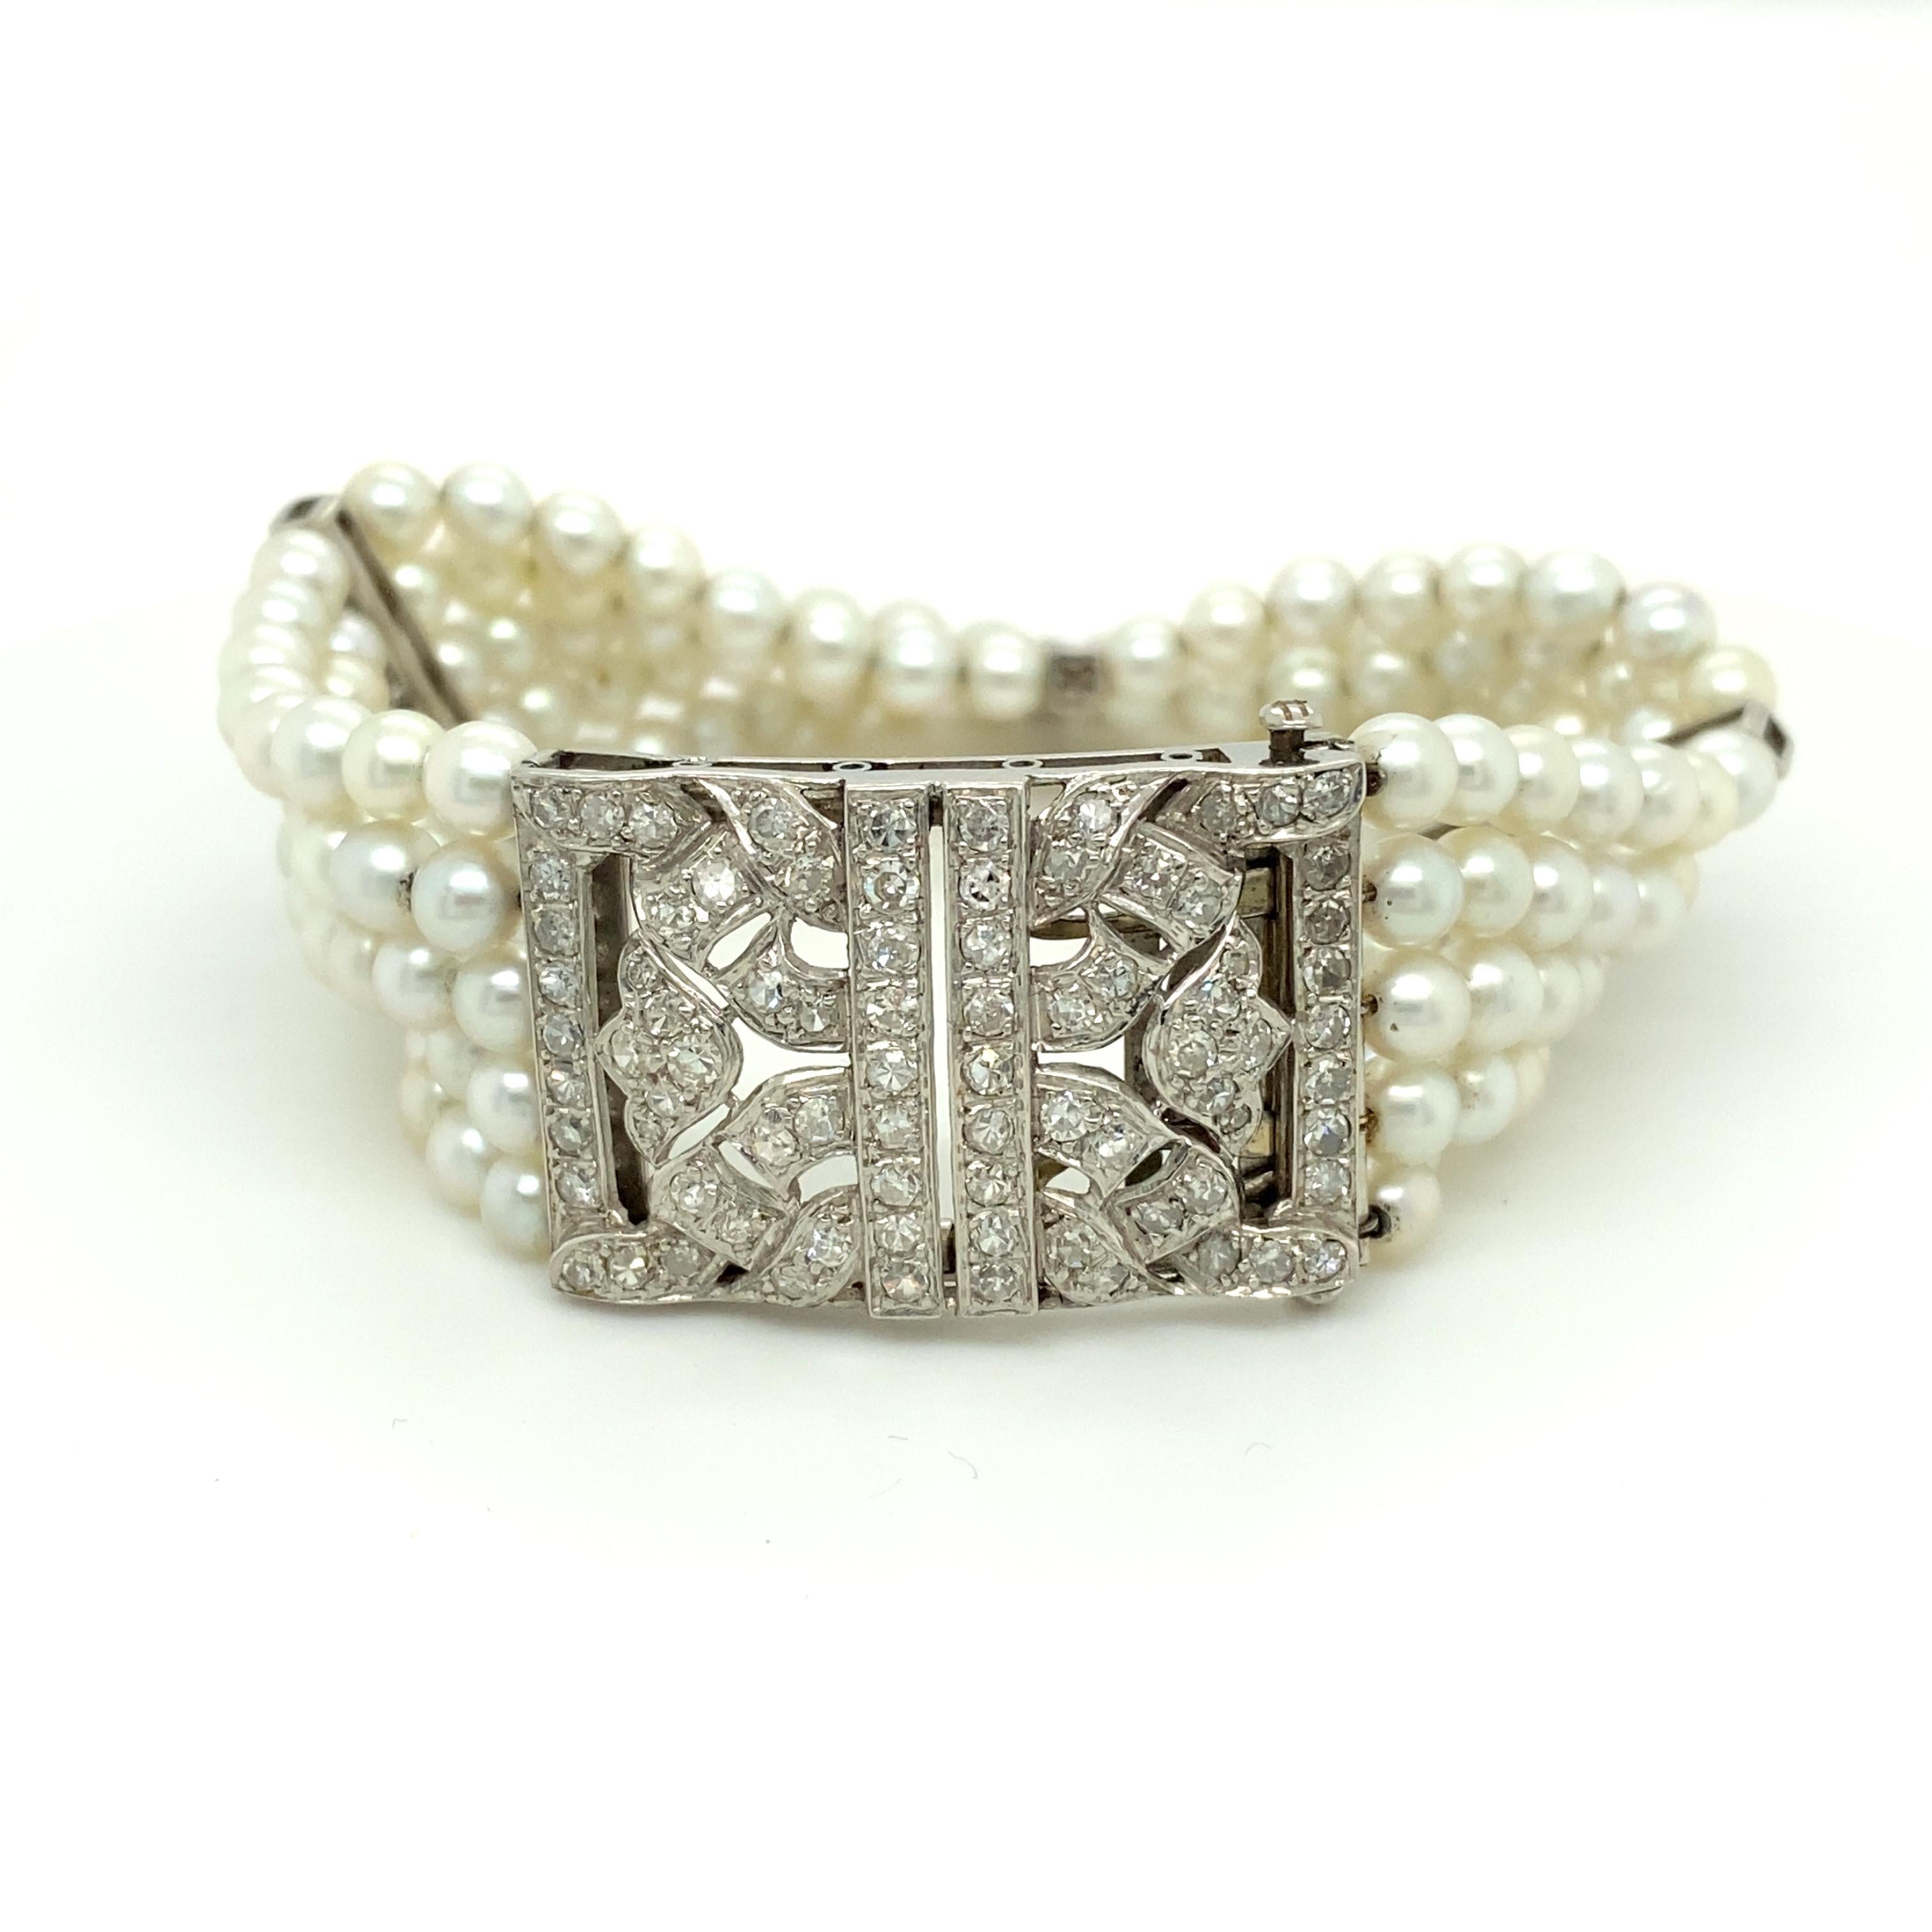 This beautiful bracelet in Art Deco style consists of five rows of fine cultured pearls of approximately 4.30  to 4.75 mm in diameter strung on metal wires.
The bracelet is closed on a charming clasp made of platinum (box) and white gold (tongue).